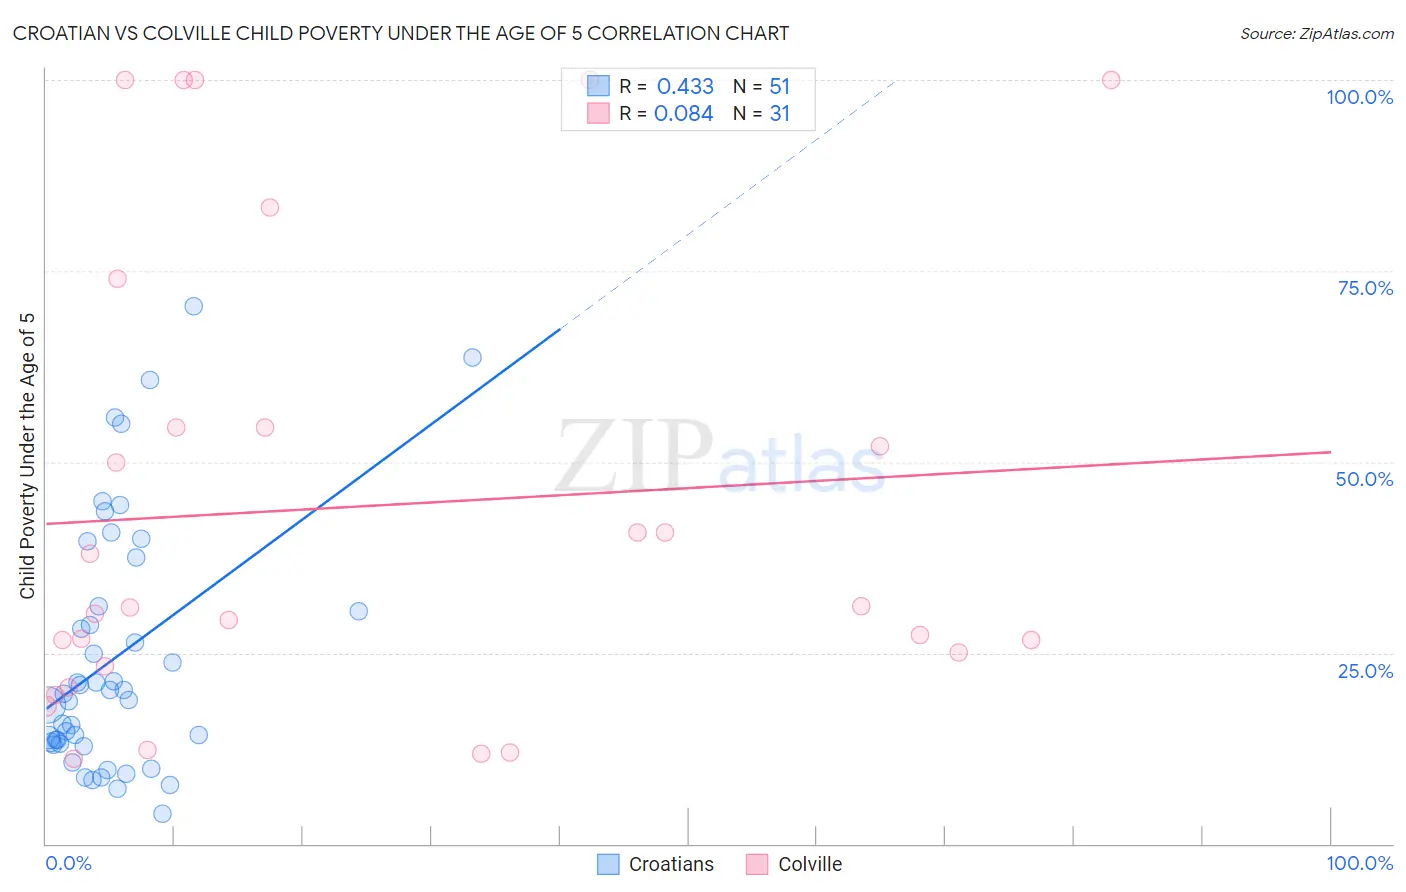 Croatian vs Colville Child Poverty Under the Age of 5